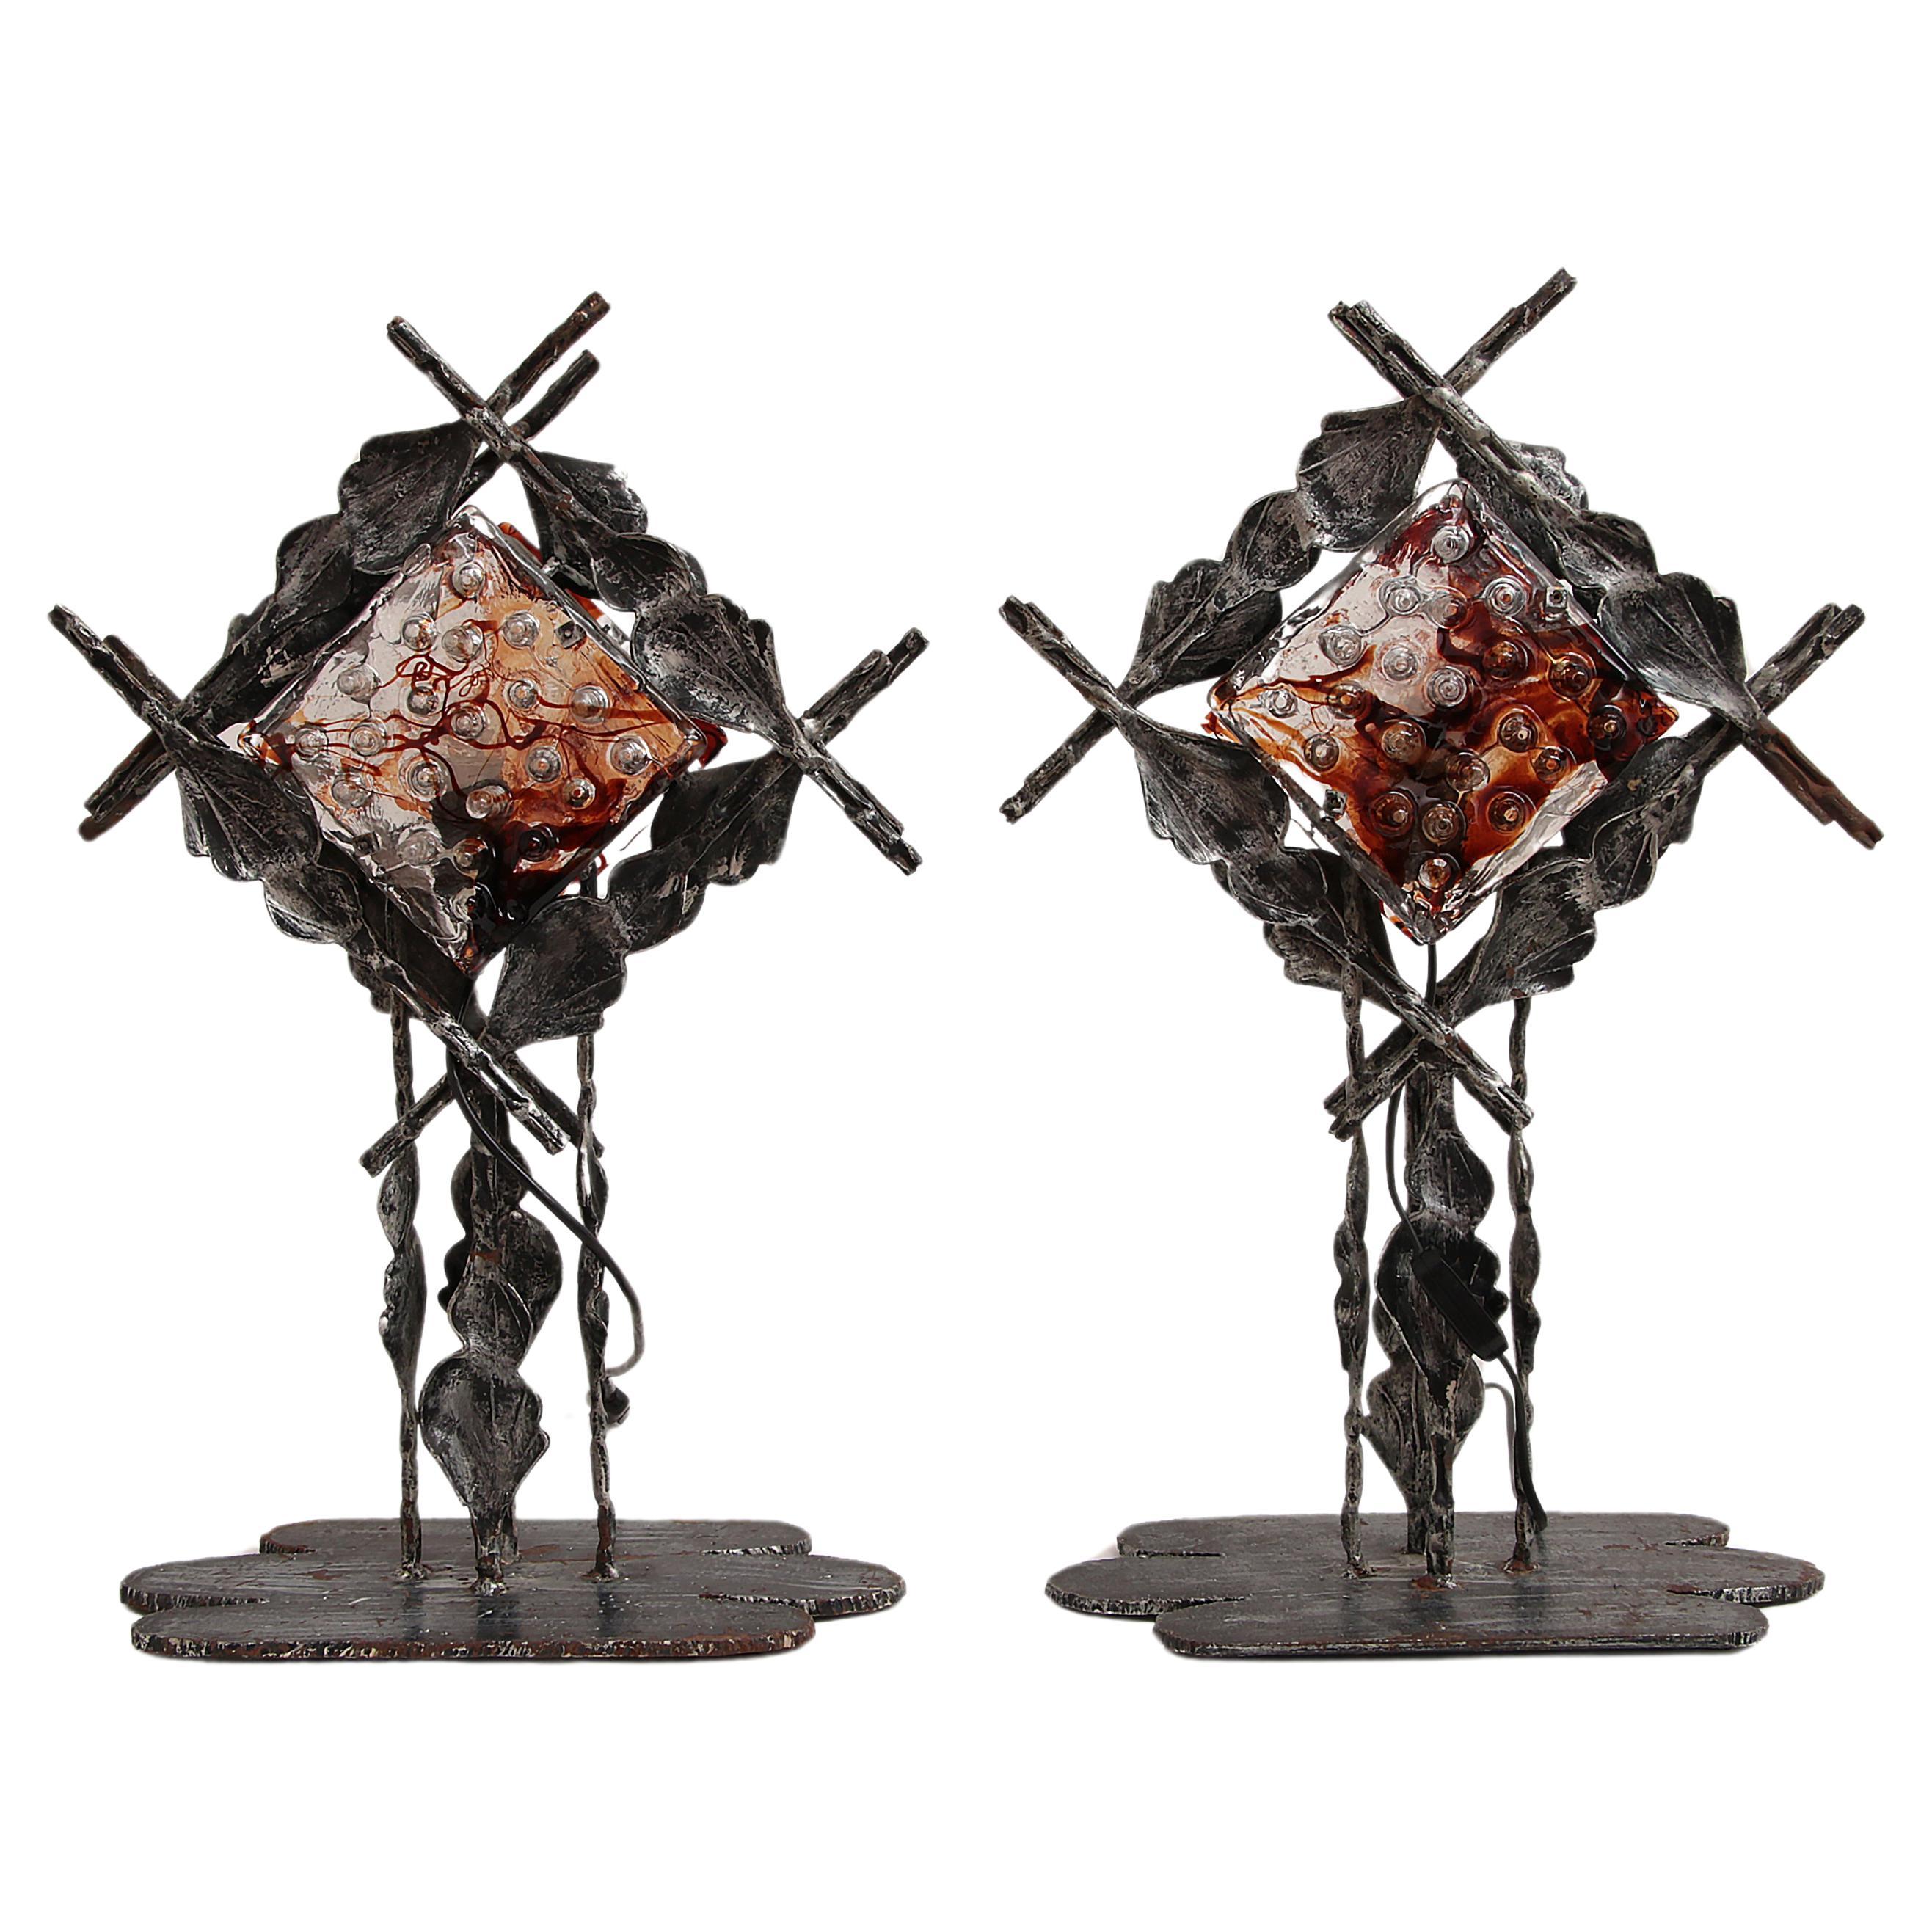 Italian Design Brutalist Table Lamps from Poliarte, Albano Poli, 1970s For Sale